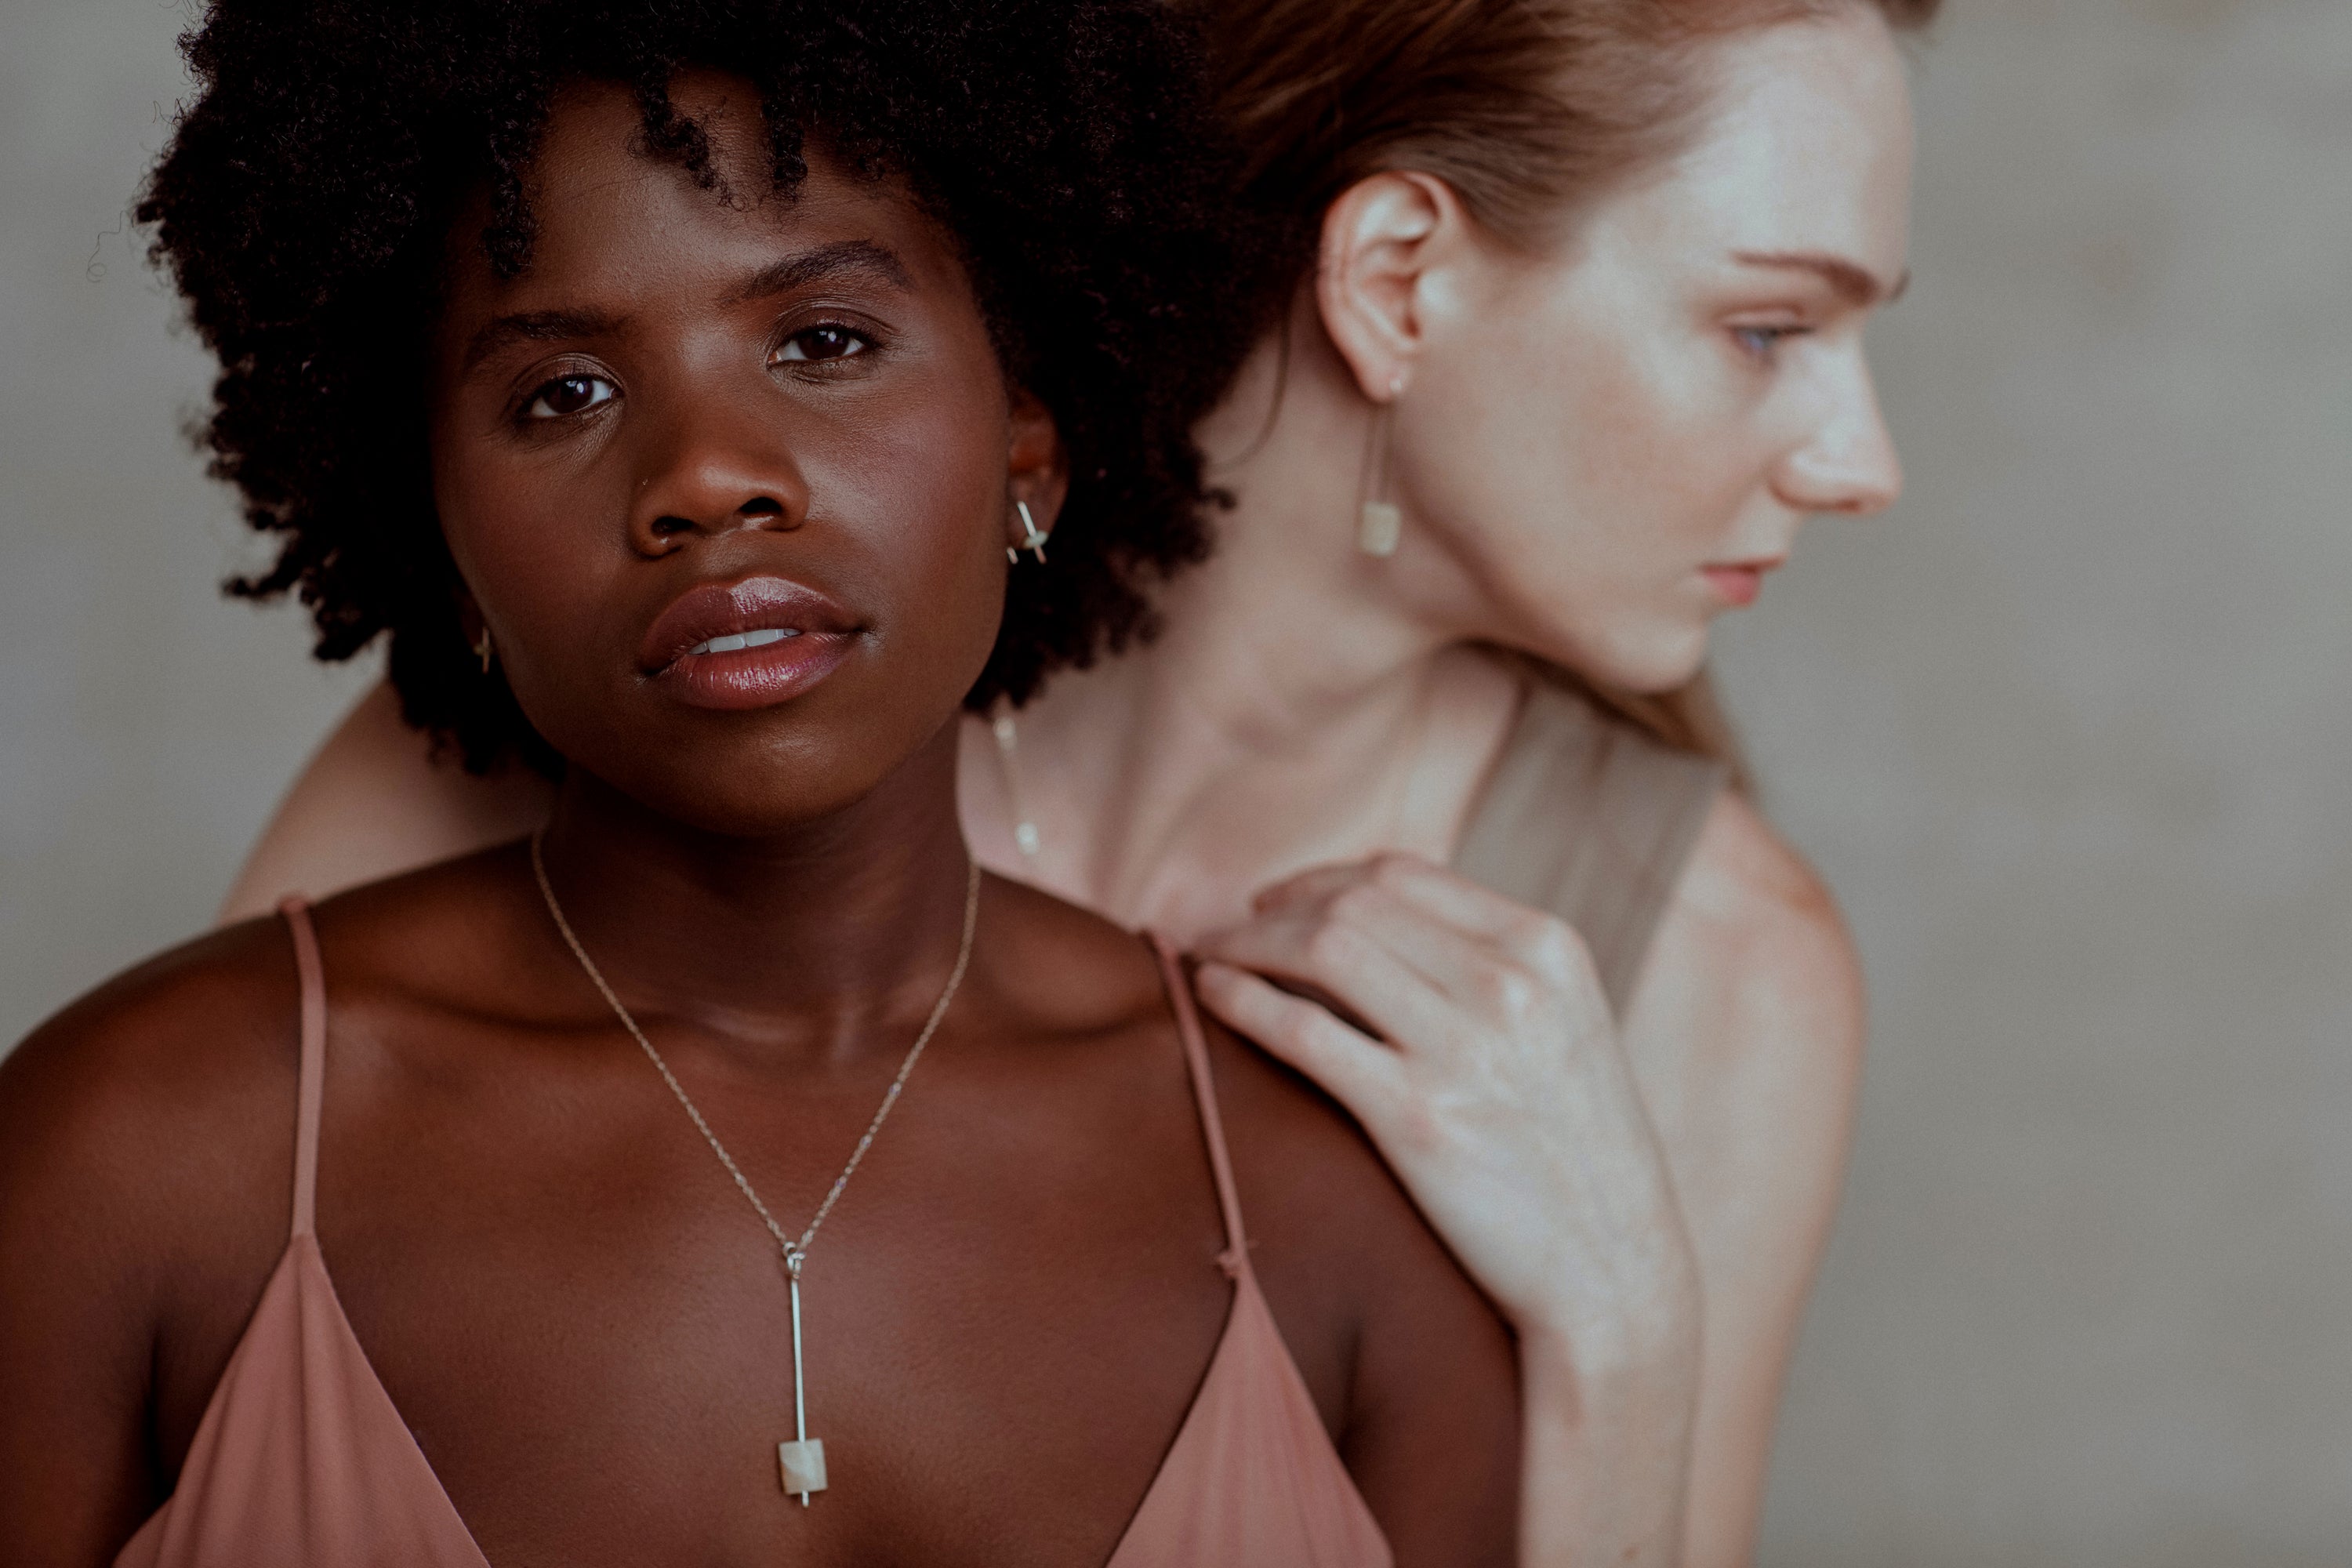 Delicate and light, the Tiny Hook Earrings are modern threader earrings featuring a delicate onyx stone hugging your earlobe.